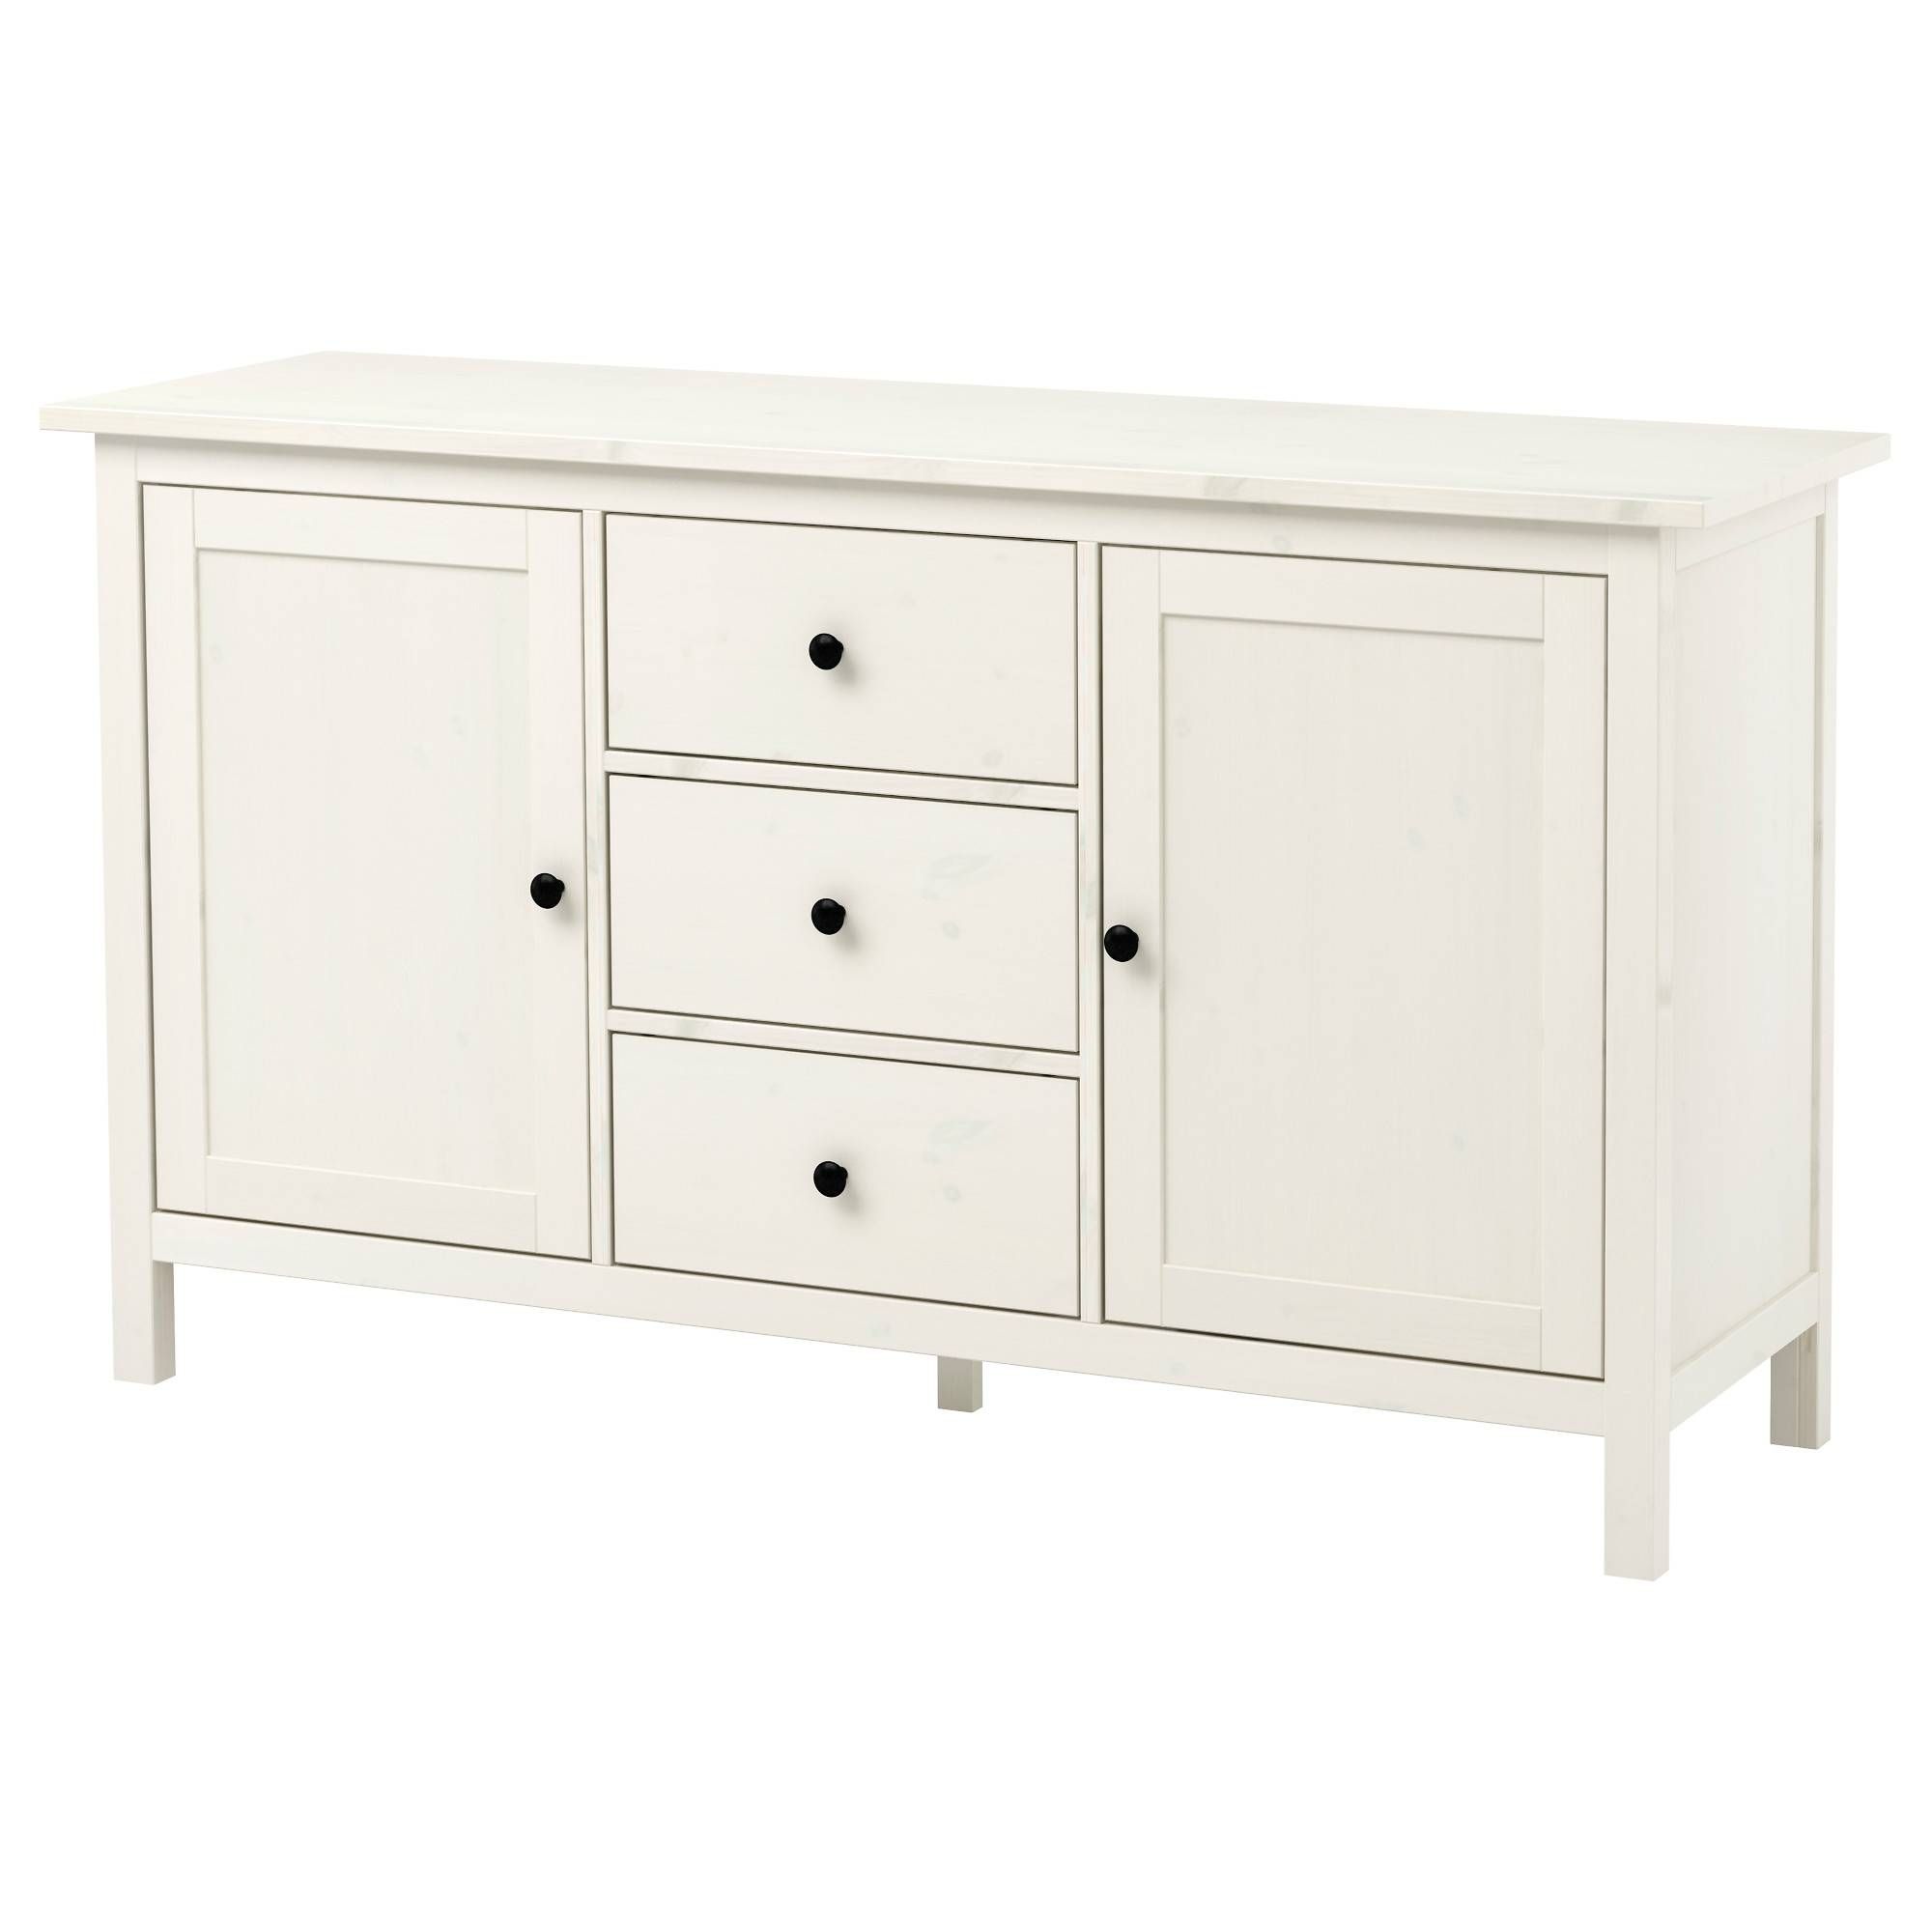 Hemnes Sideboard White Stain 157x88 Cm – Ikea Within Sideboard Tables (View 6 of 15)